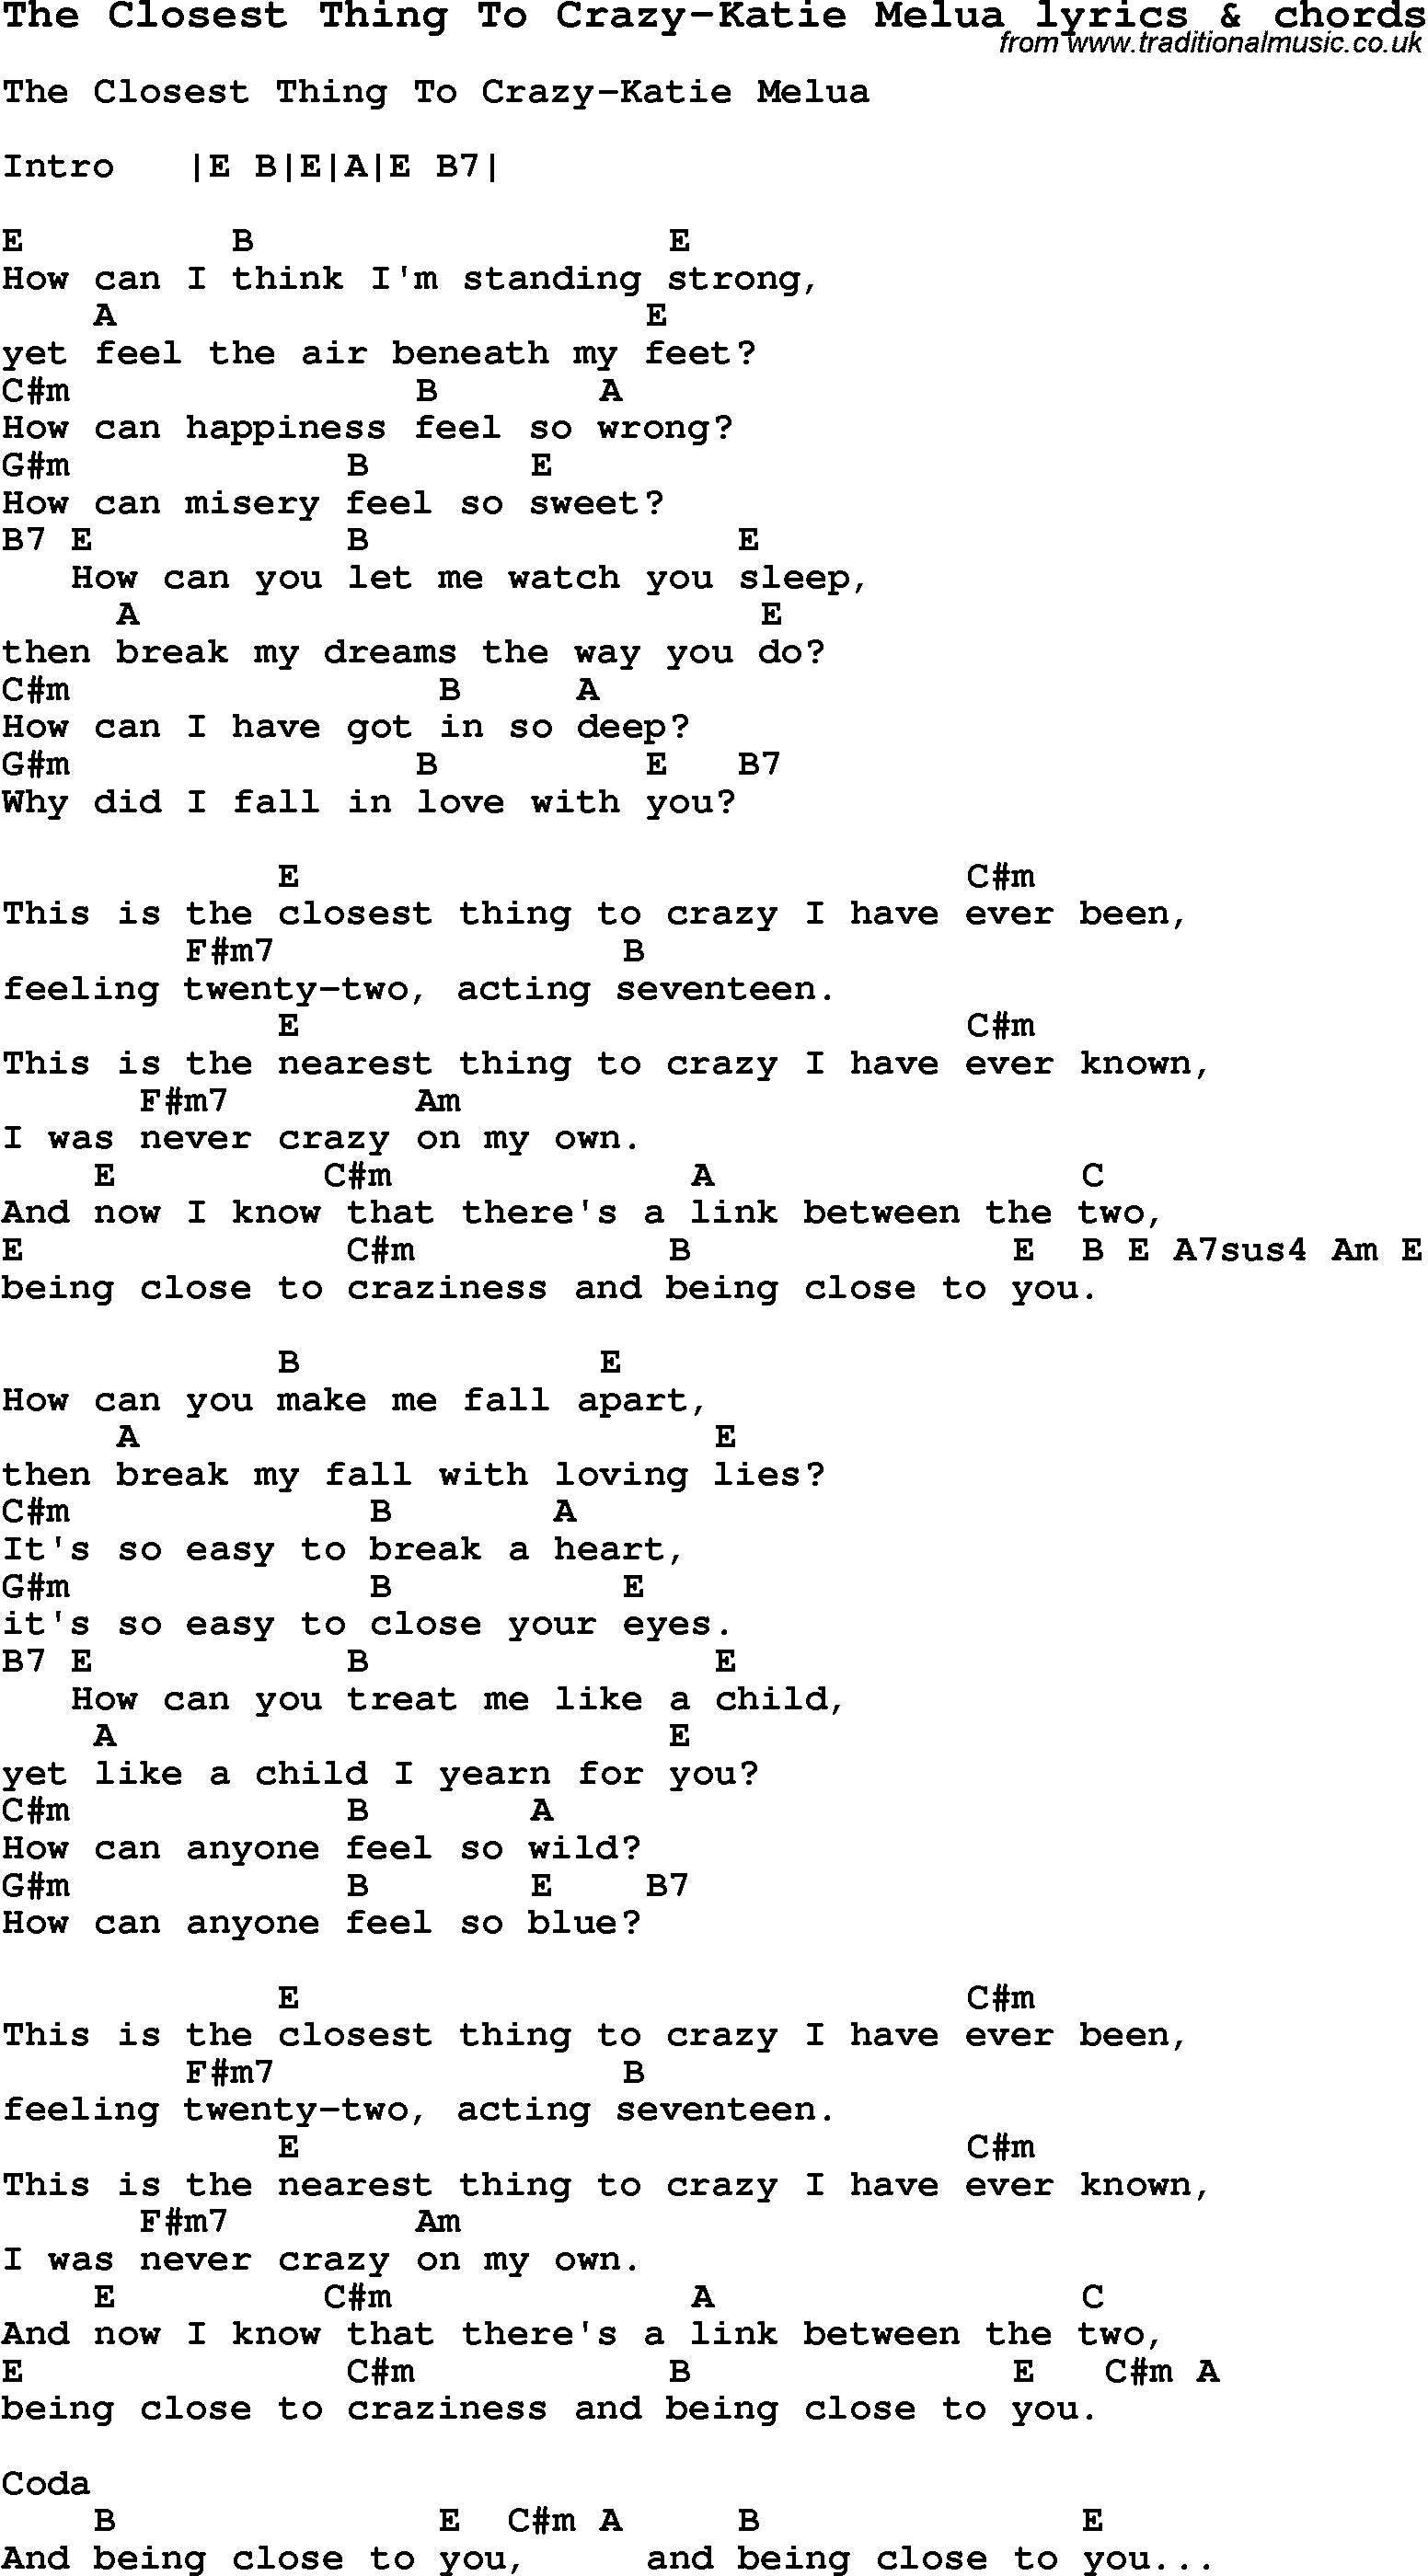 Love Song Lyrics for: The Closest Thing To Crazy-Katie Melua with chords for Ukulele, Guitar Banjo etc.